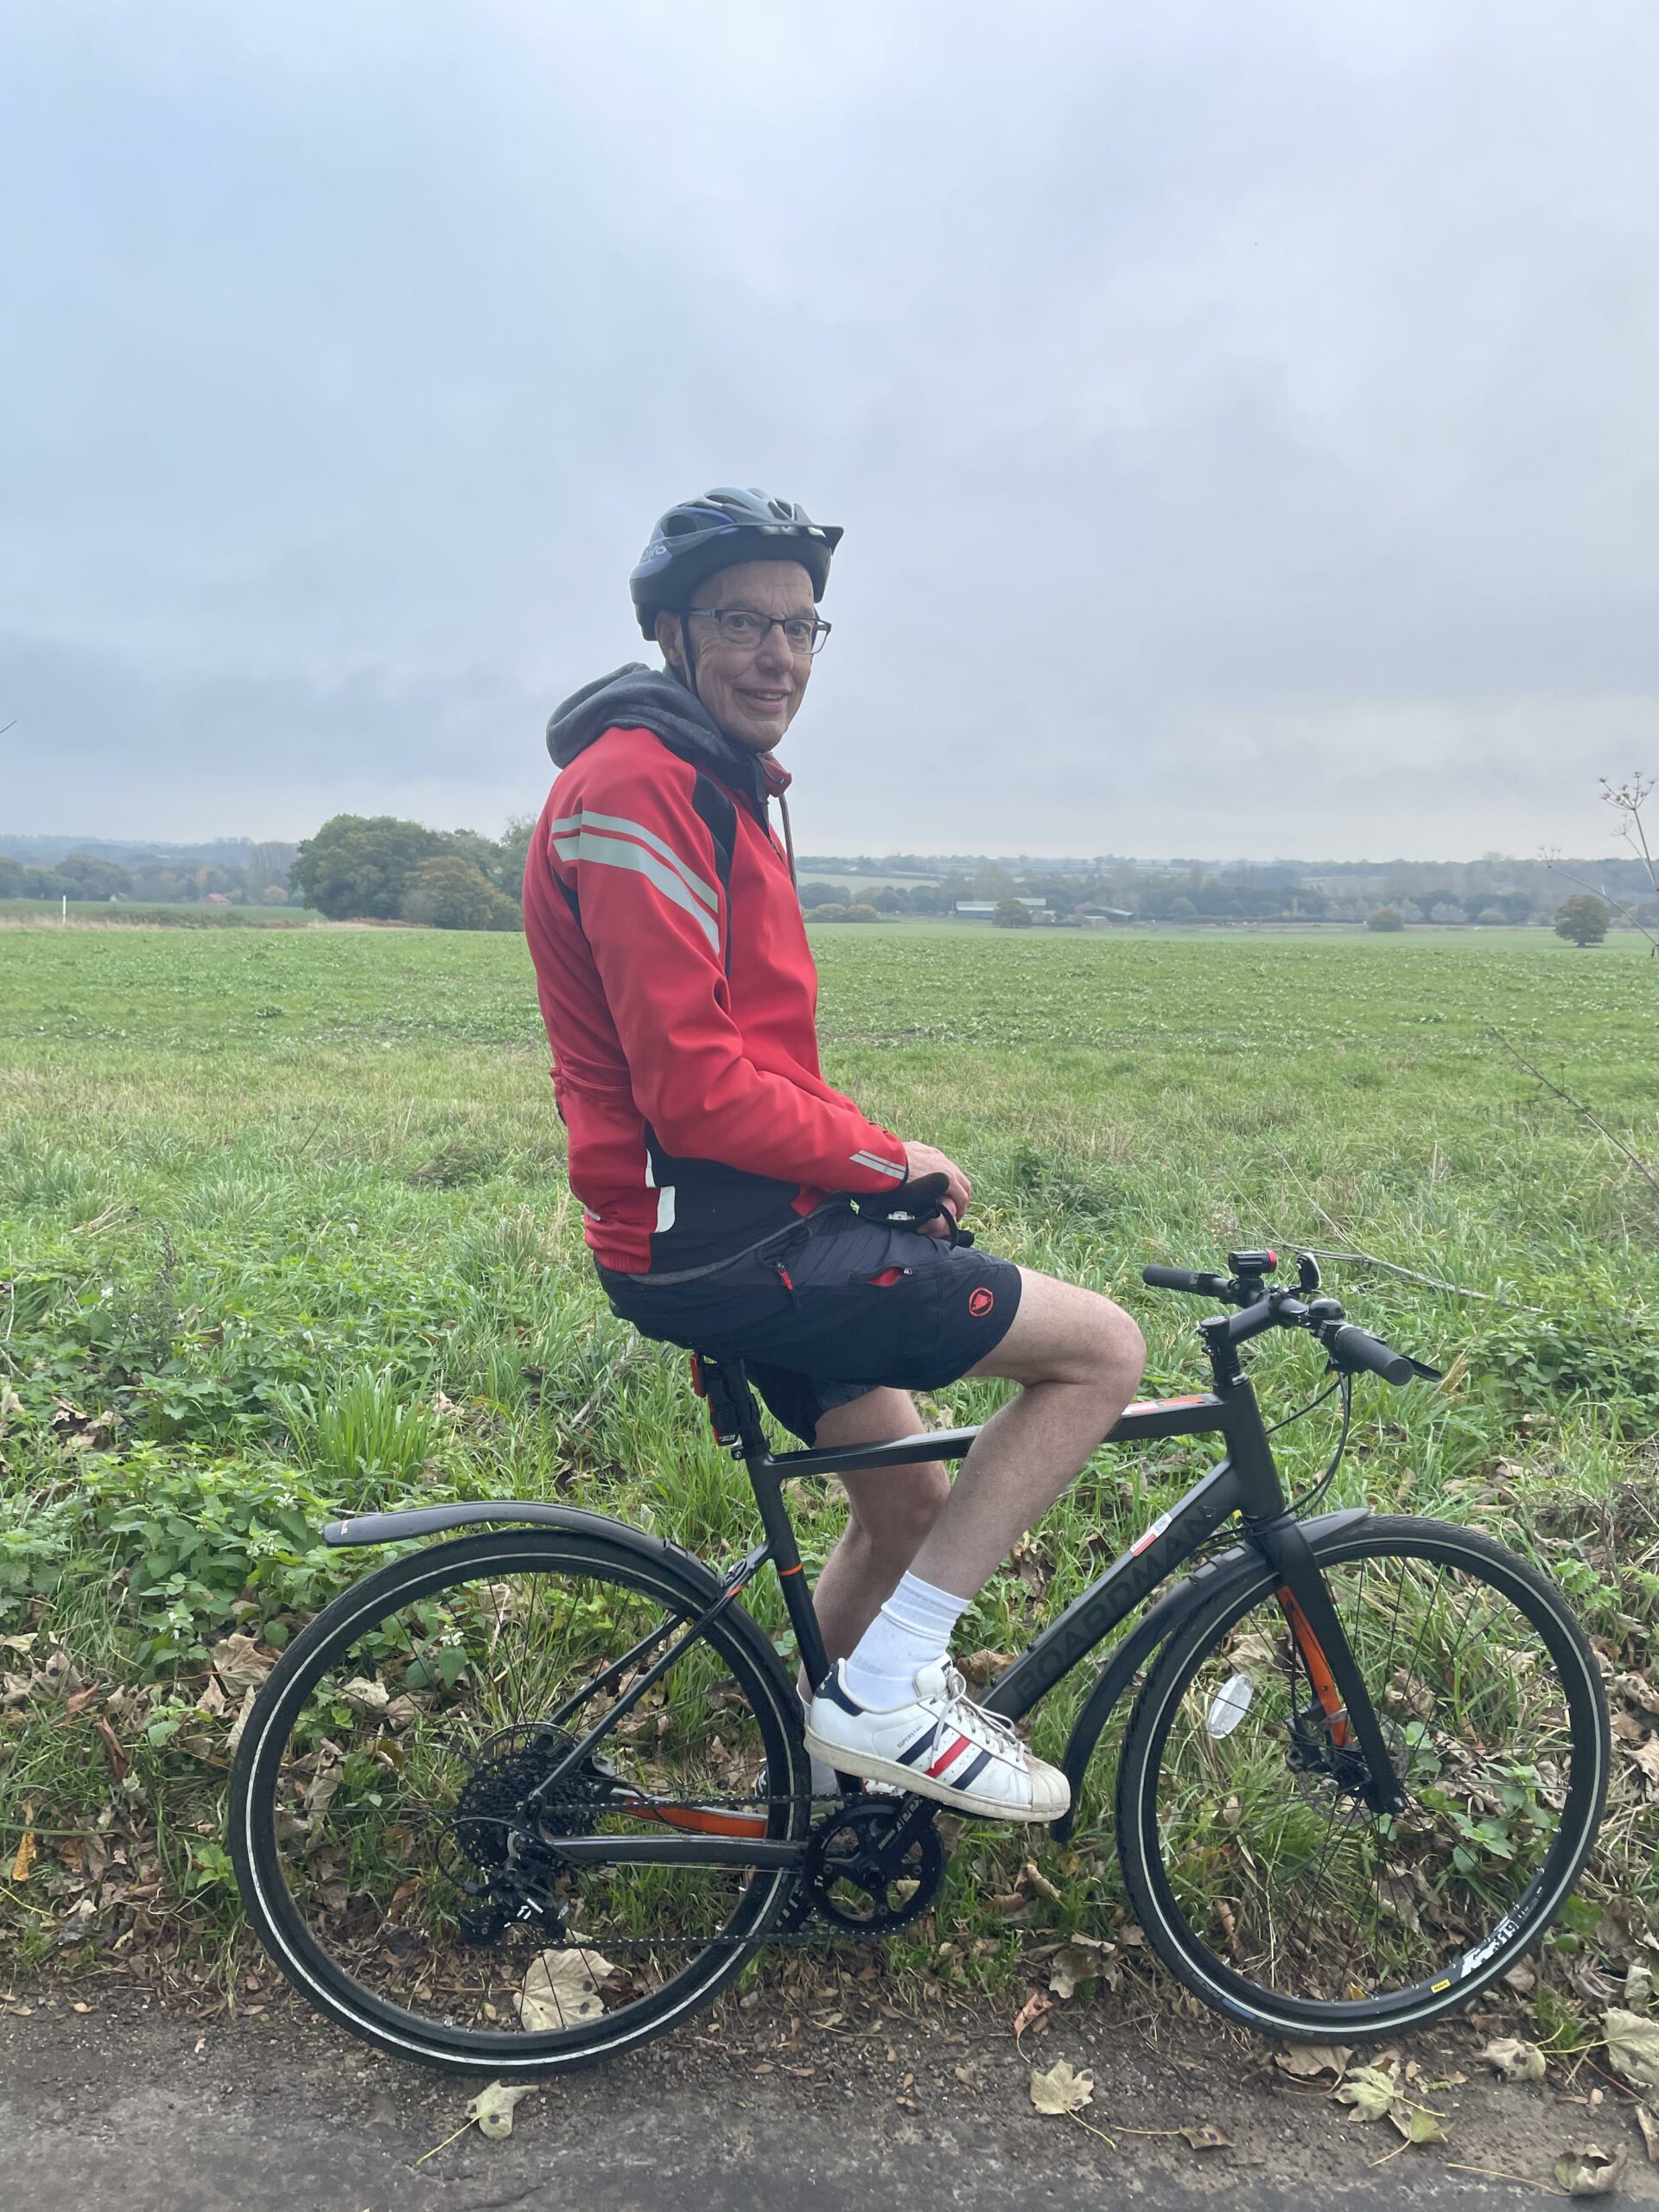 Andrew is sitting on his bicycle by a picturesque field. He is wearing a helmet and smiling.